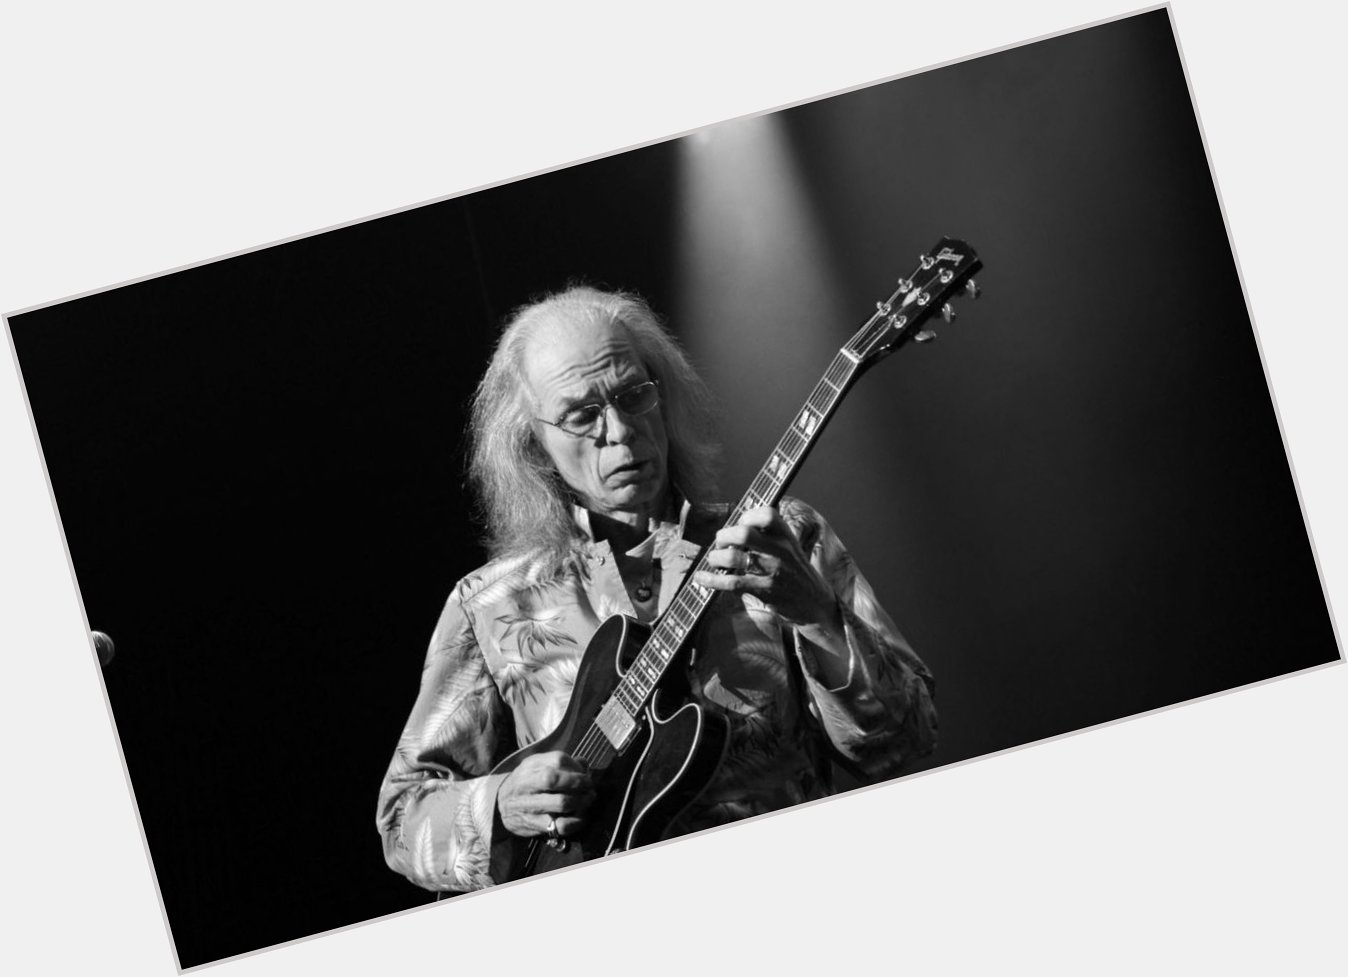 Happy birthday to Steve Howe, who is 72 today! 